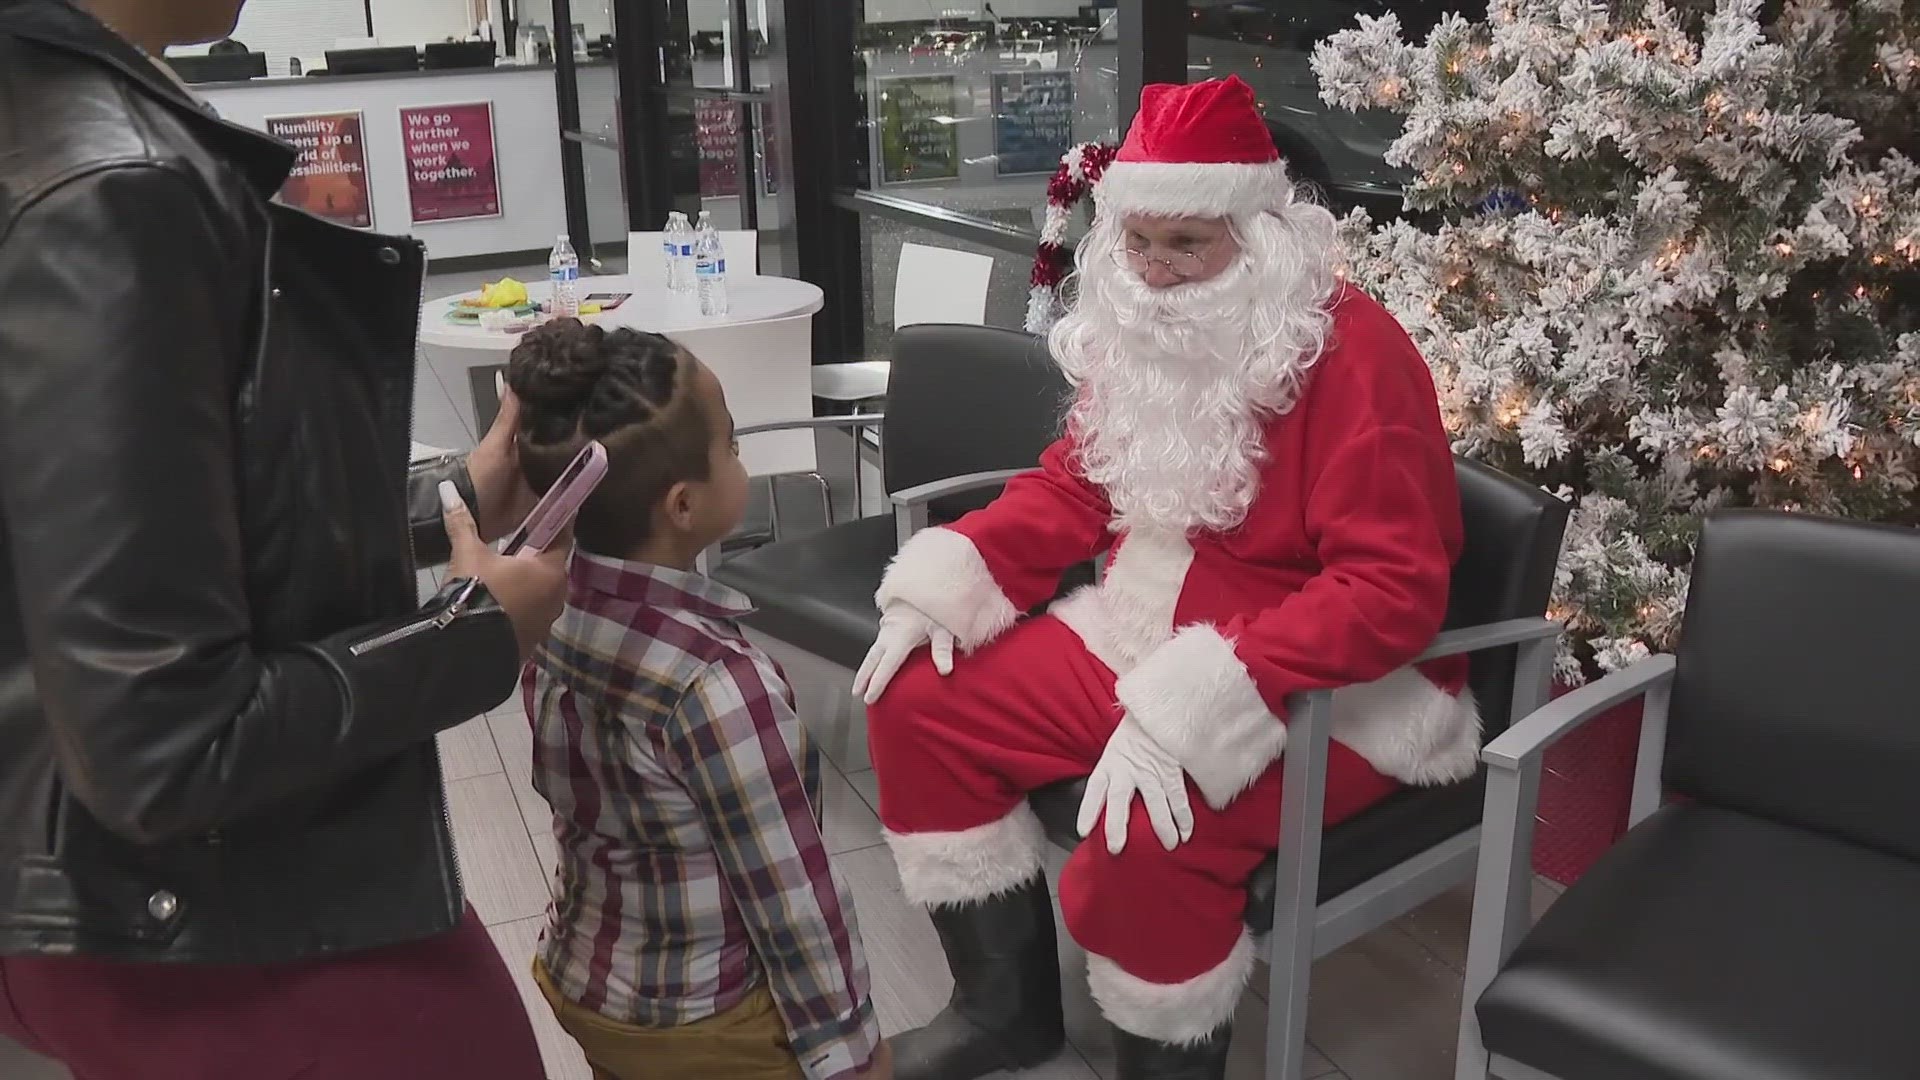 The car dealership went above and beyond to spread holiday cheer to Valley families in need this season.